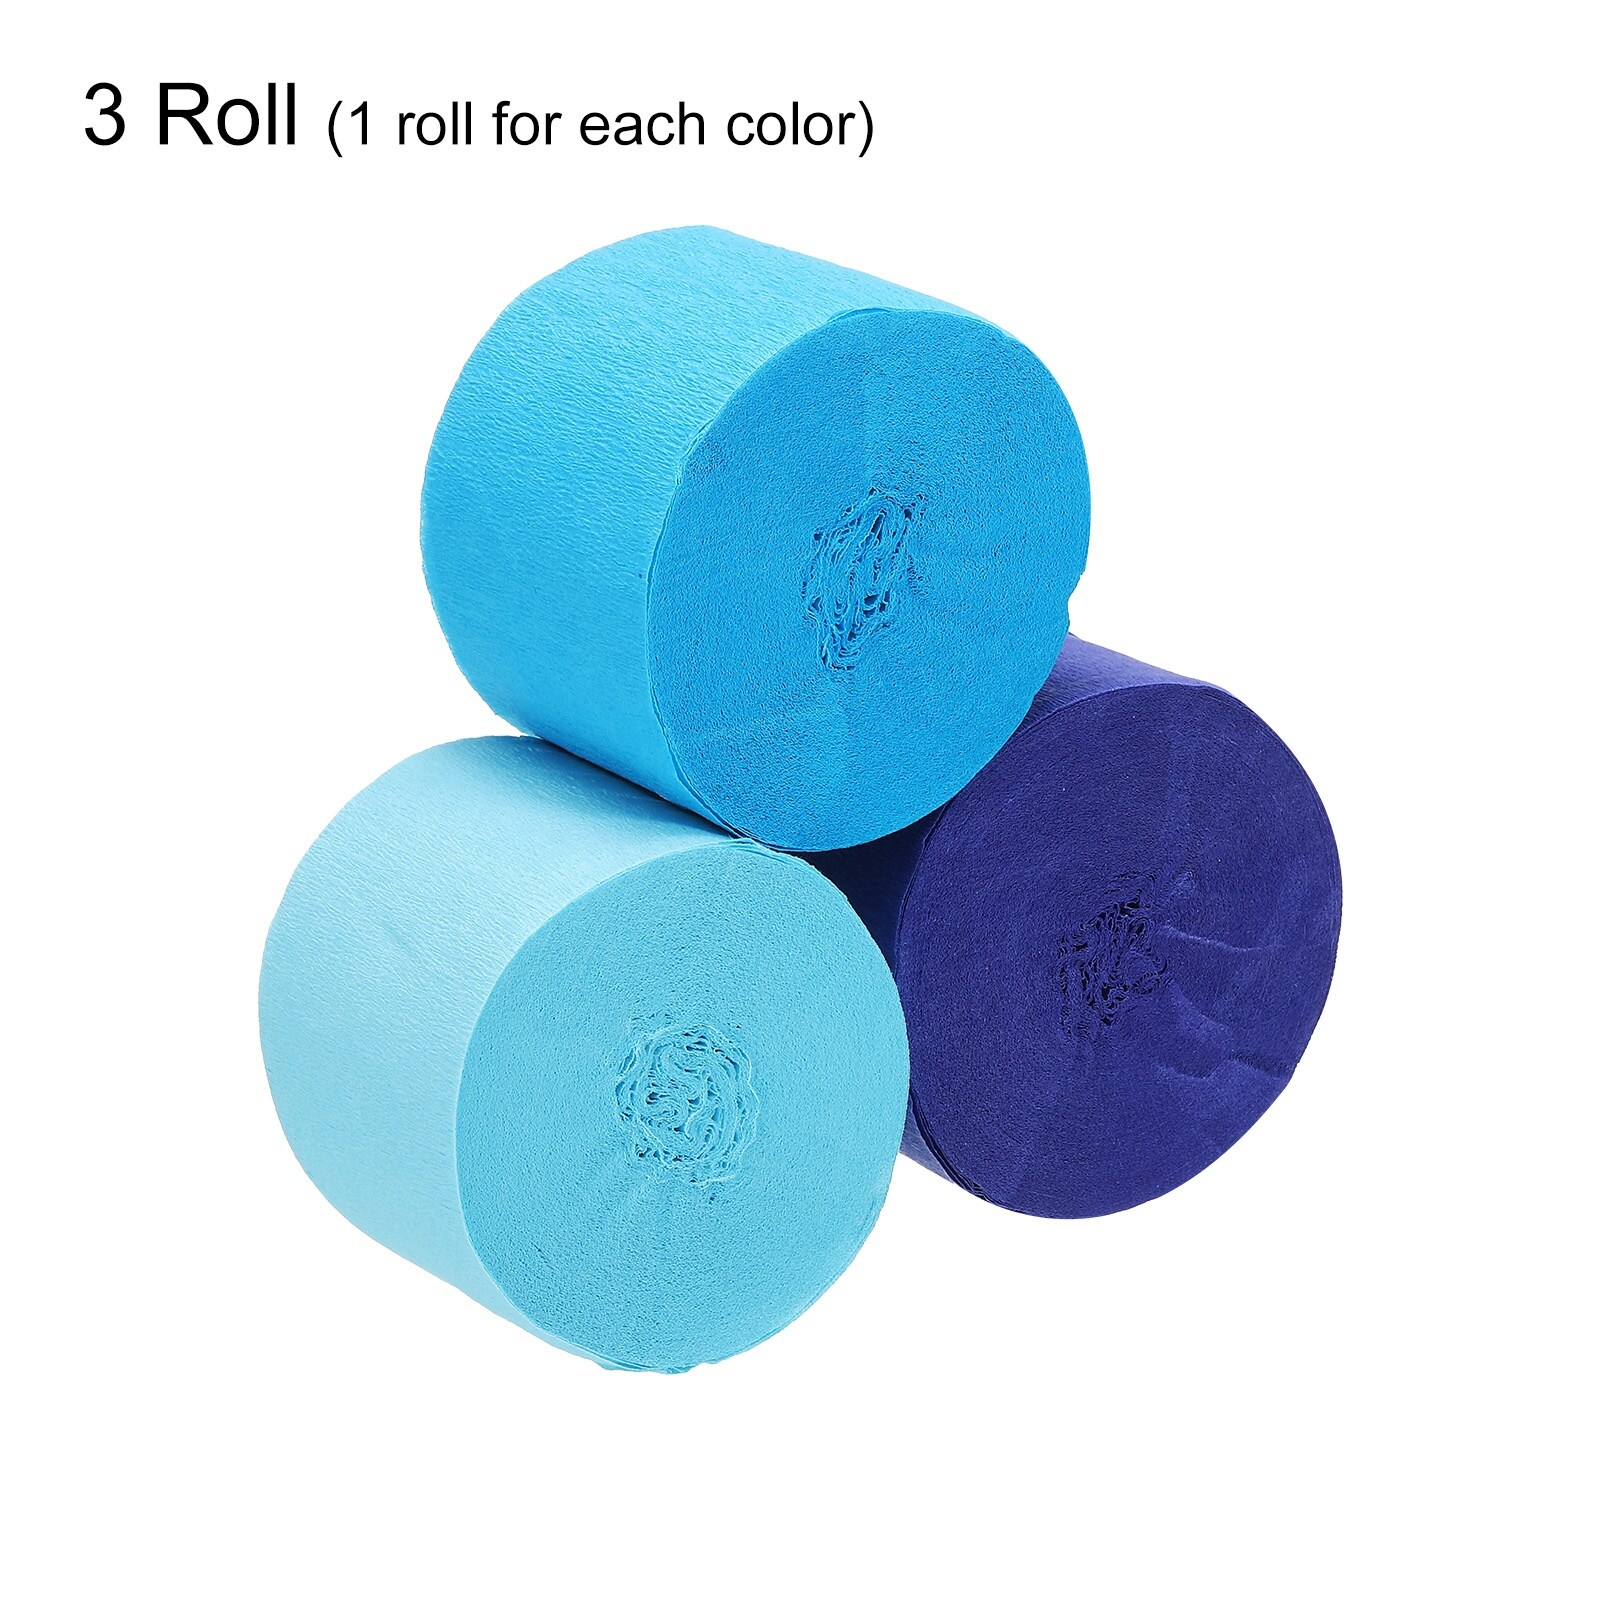 House of Party Blue Skies Crepe Paper Streamers 6 Crepe Paper Rolls 492ft (1.8 inch x 82 ft/roll) - Pack of 4 Shades of Blue, 1 Silver, 1 White